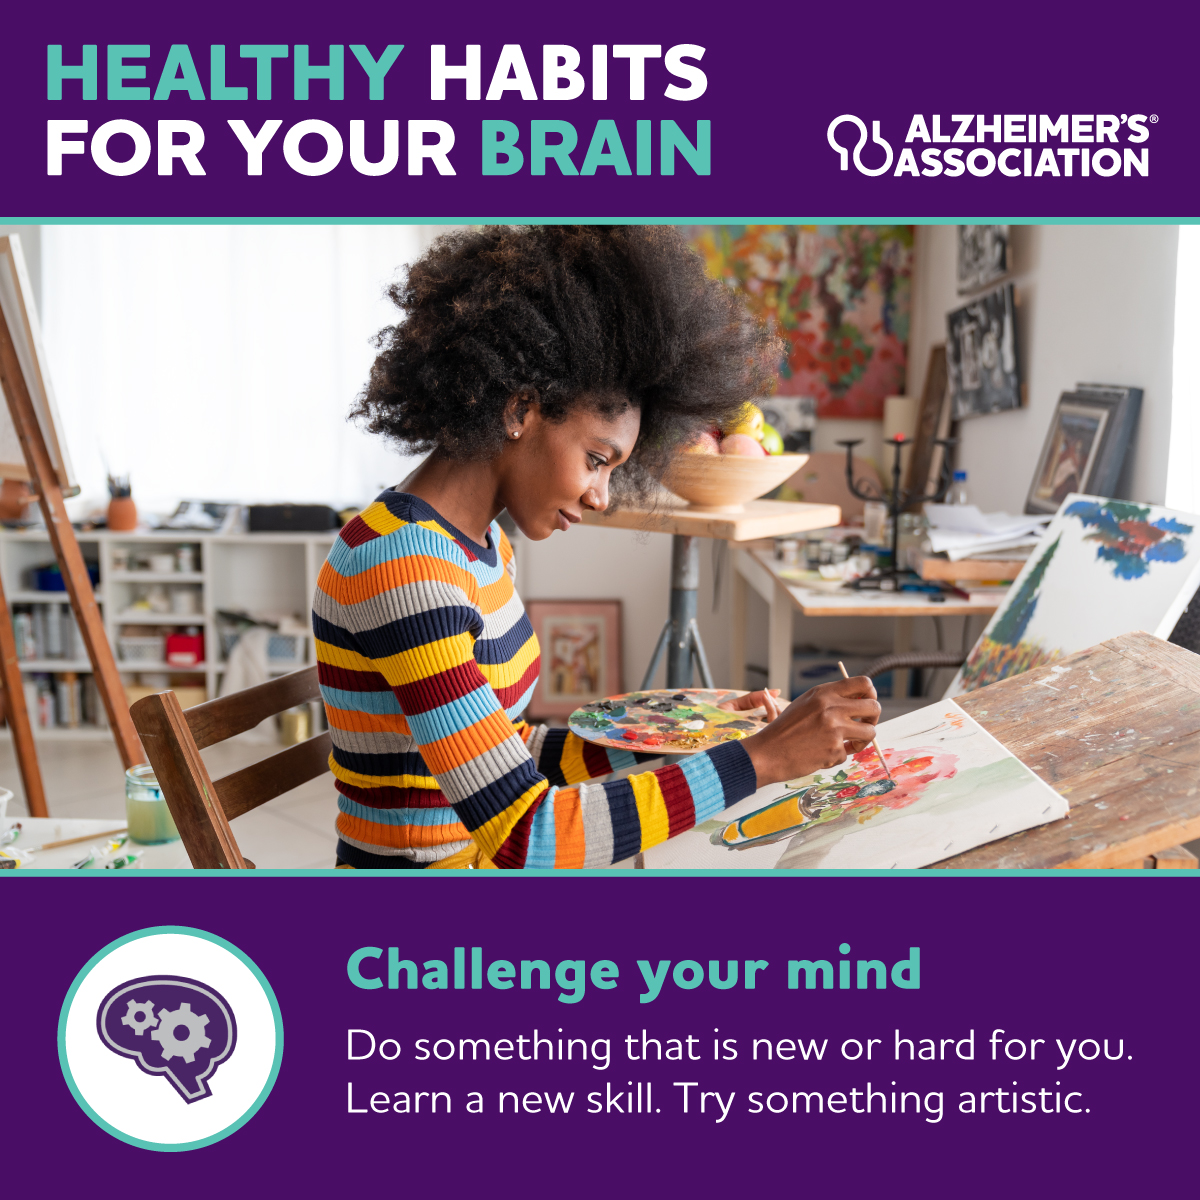 Today is #NationalPuzzleDay! Break out a jigsaw, crossword or a puzzle of choice, and put your brain to work. 🧩 Challenging your mind may have short- and long-term benefits.